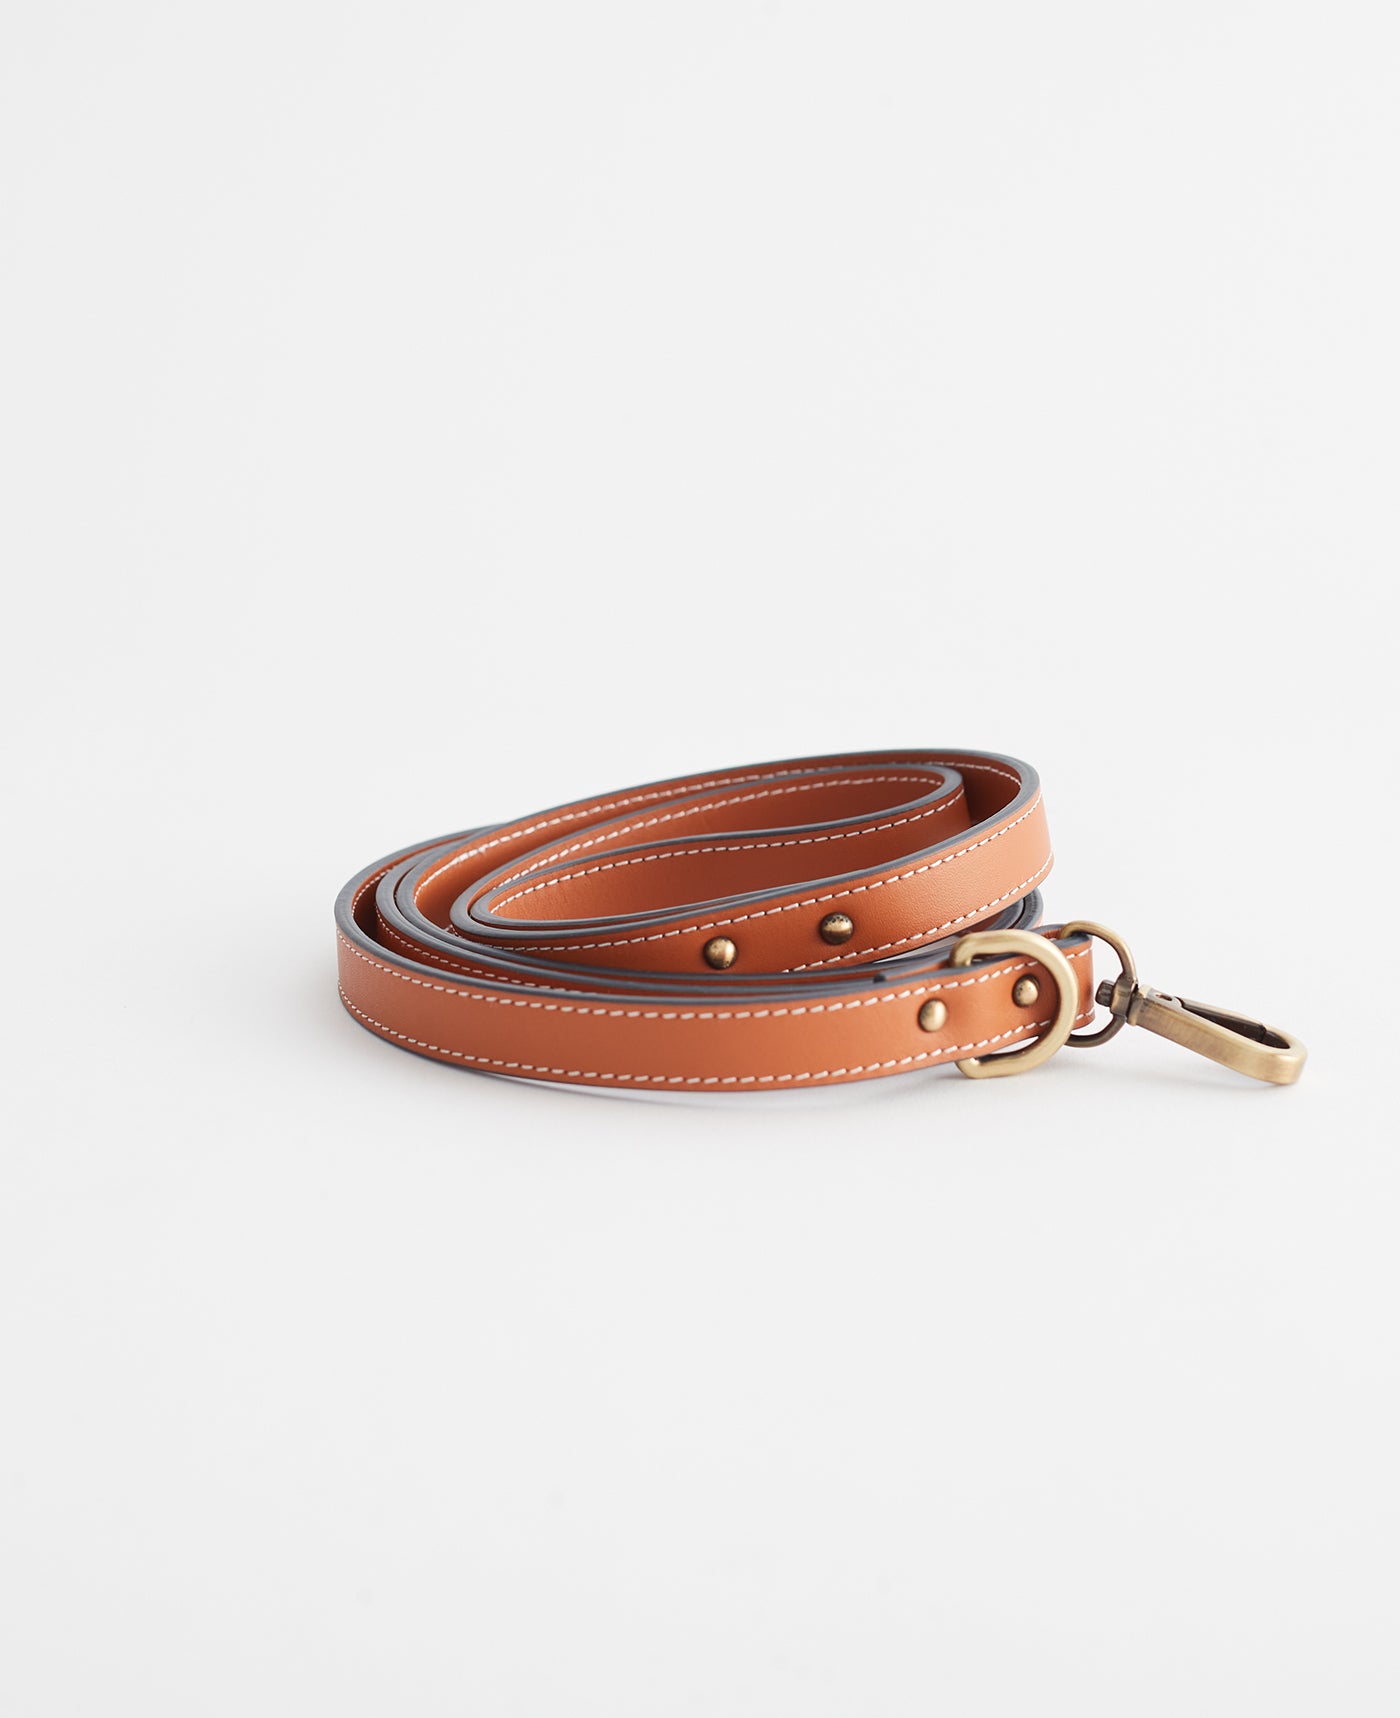 Leather Dog Lead/Leash in Tan - Size Small by The Horse®